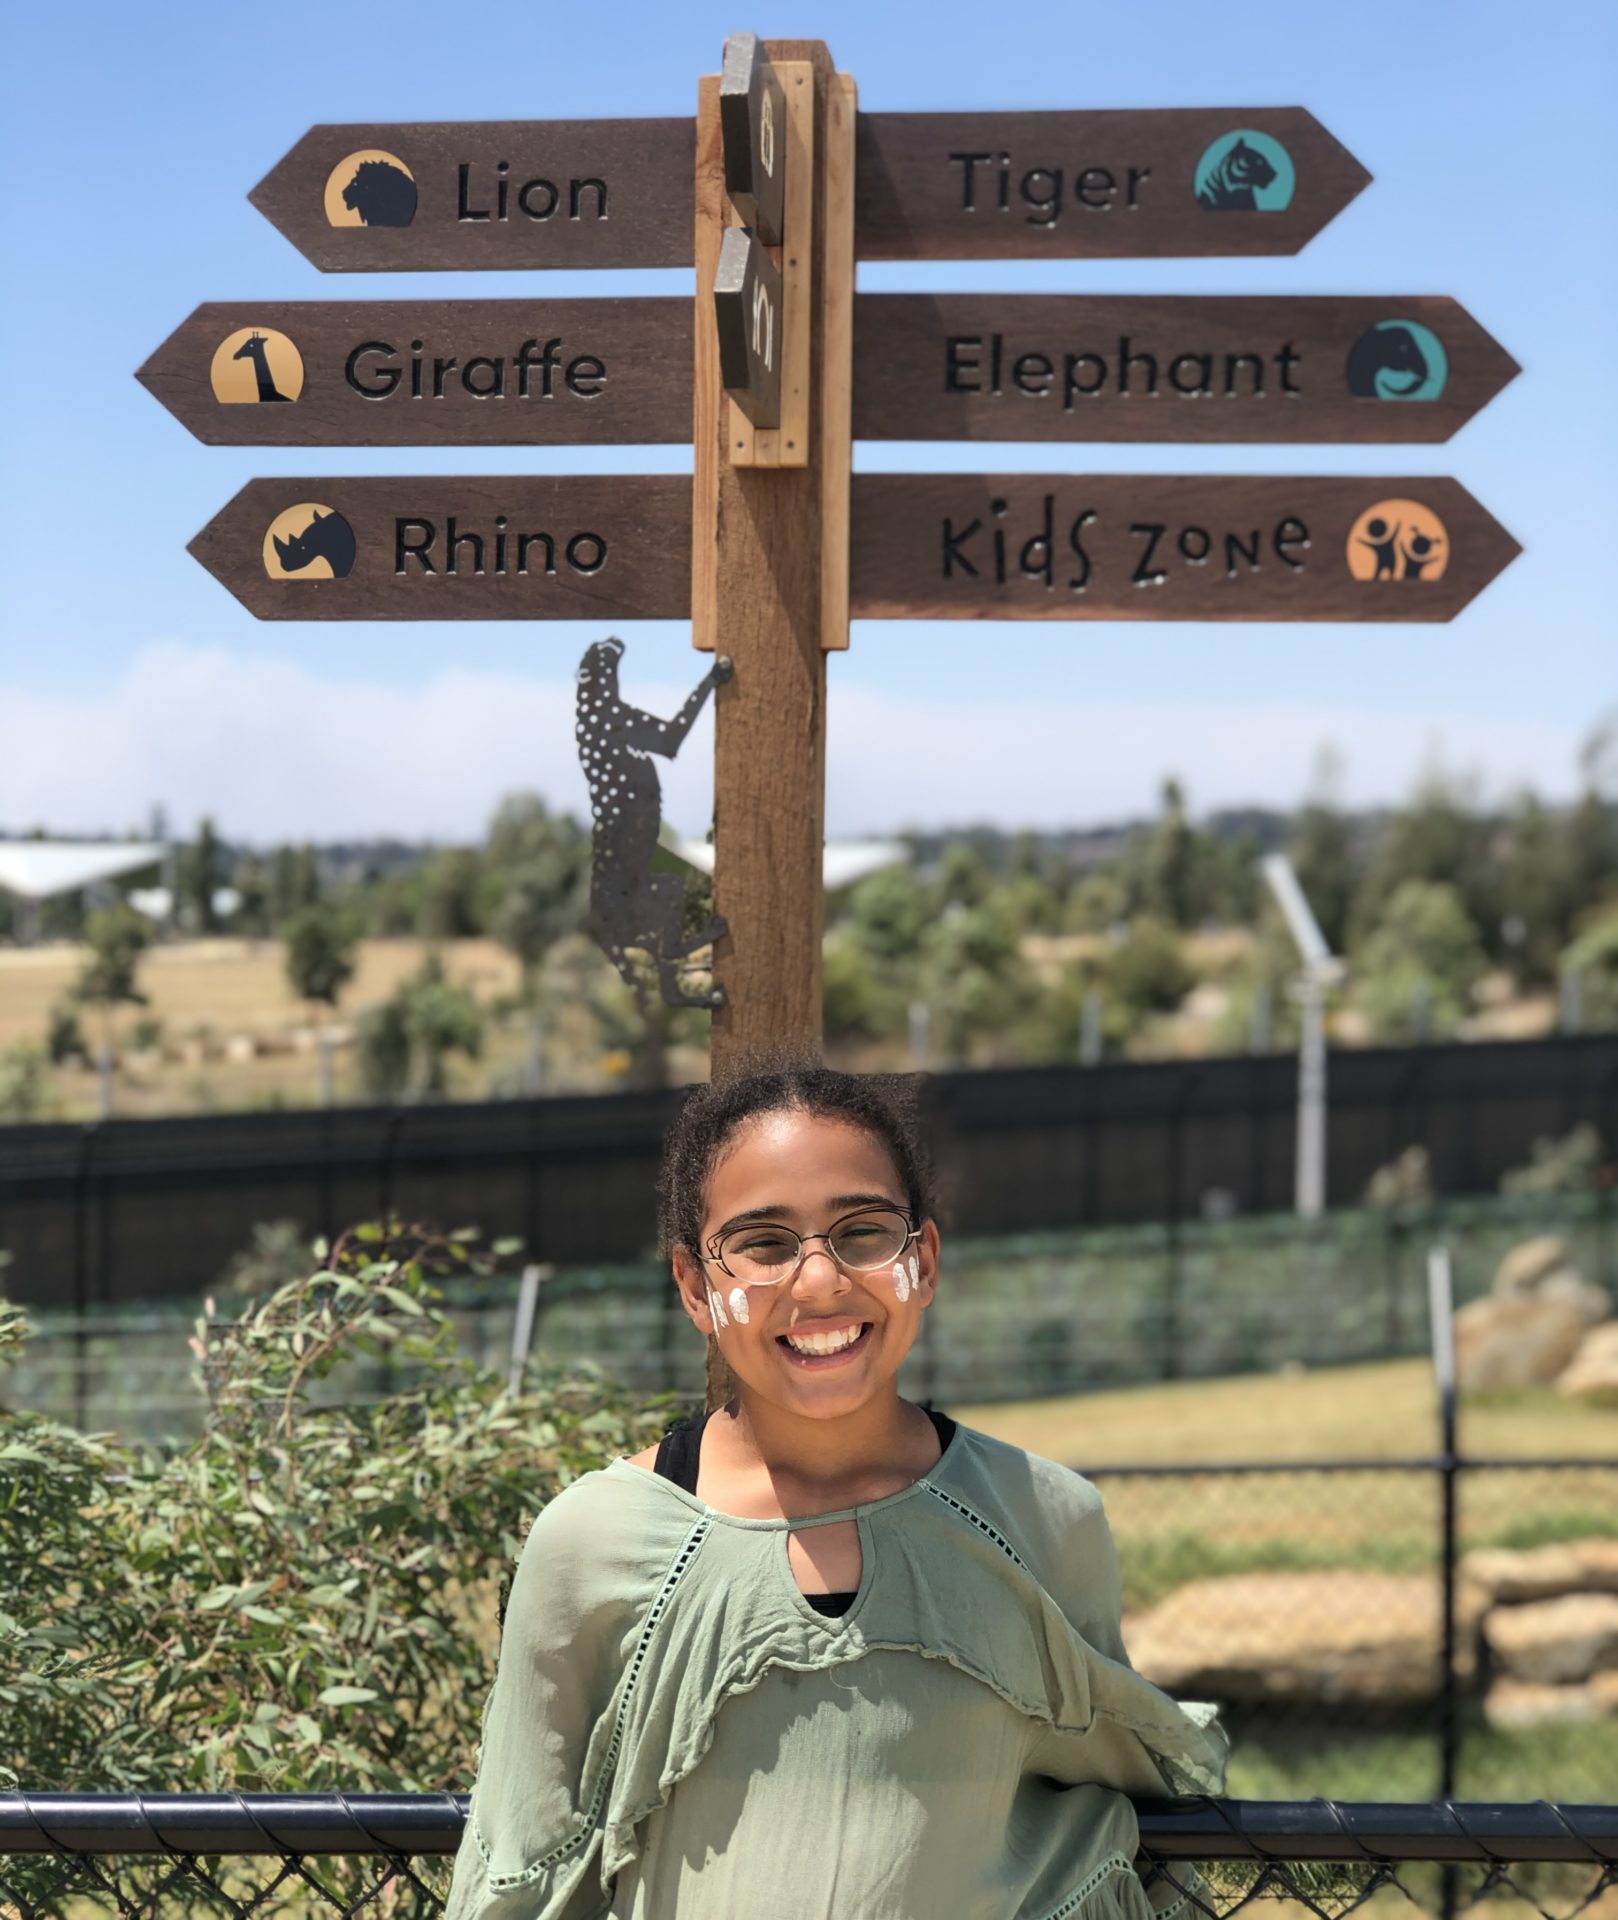 A young girl stands next to a sign post at Sydney Zoo on a school,excursion visit